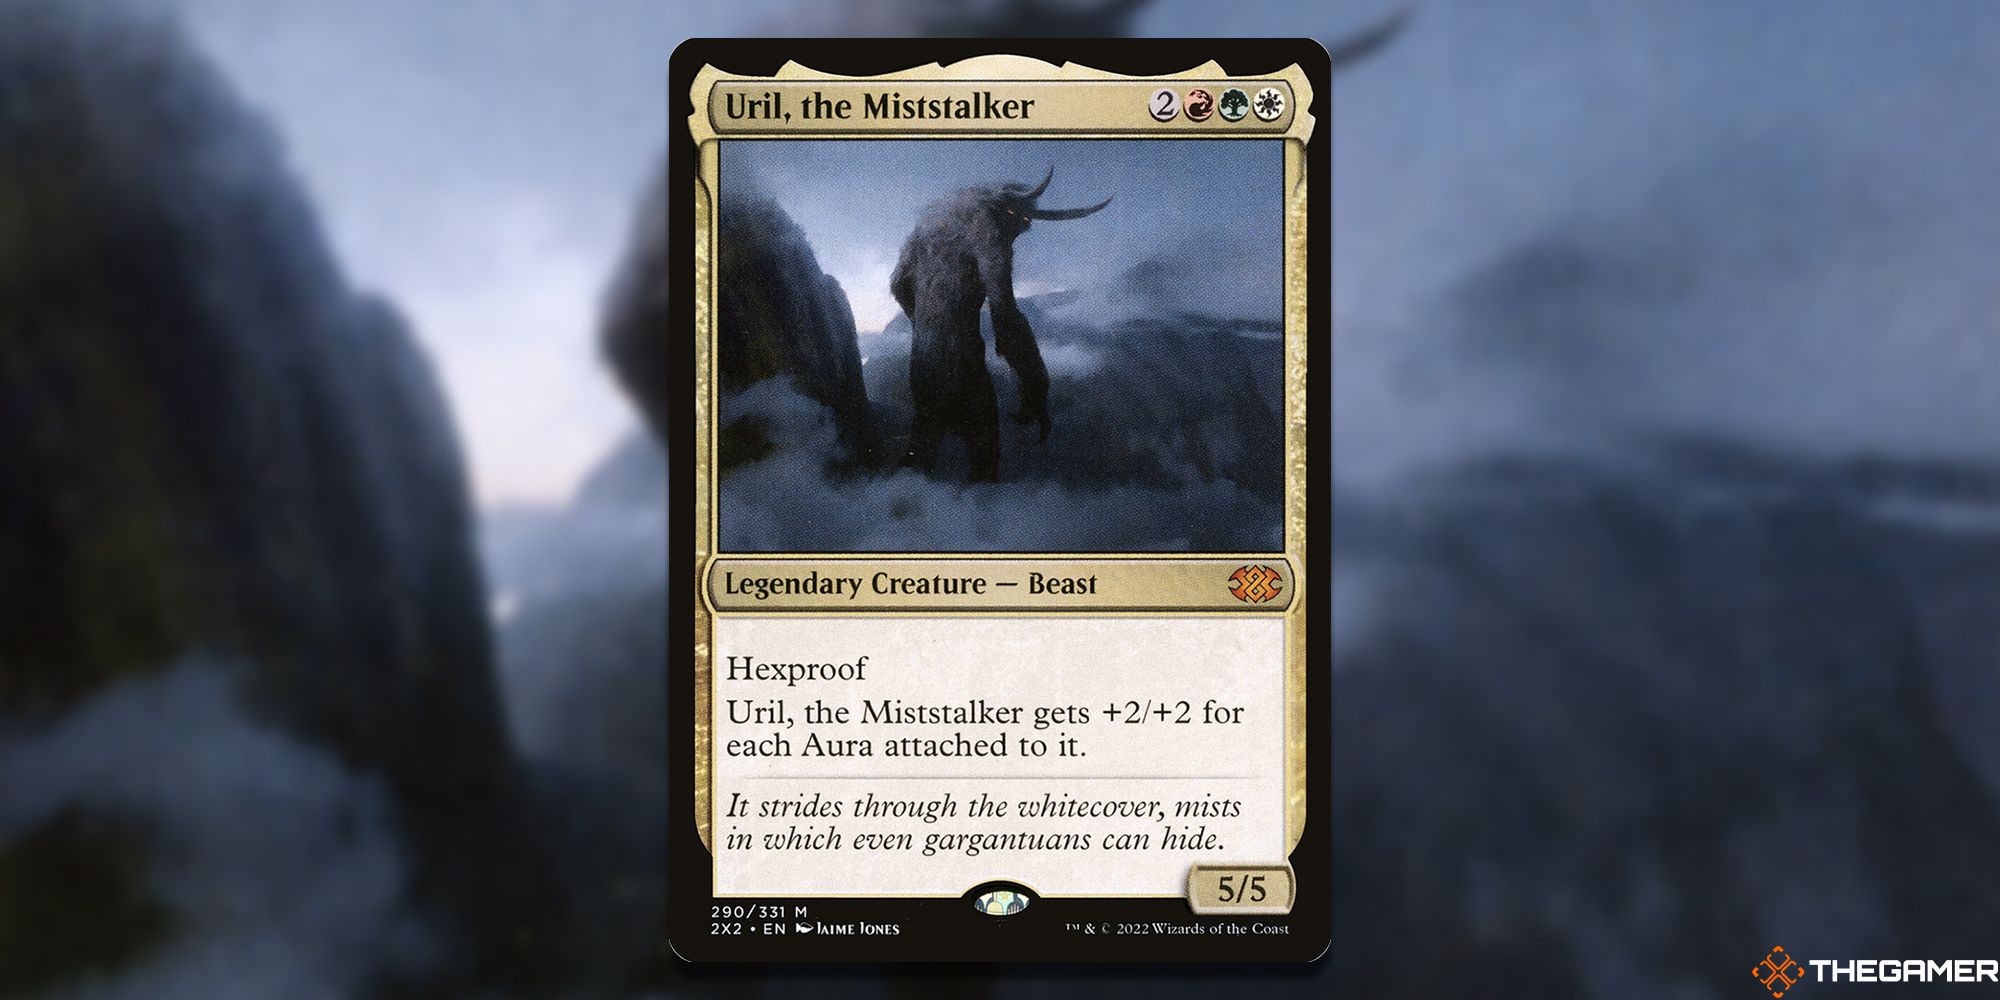 Image of the Uril, the Miststalker card in Magic: The Gathering, with art by Jaime Jones